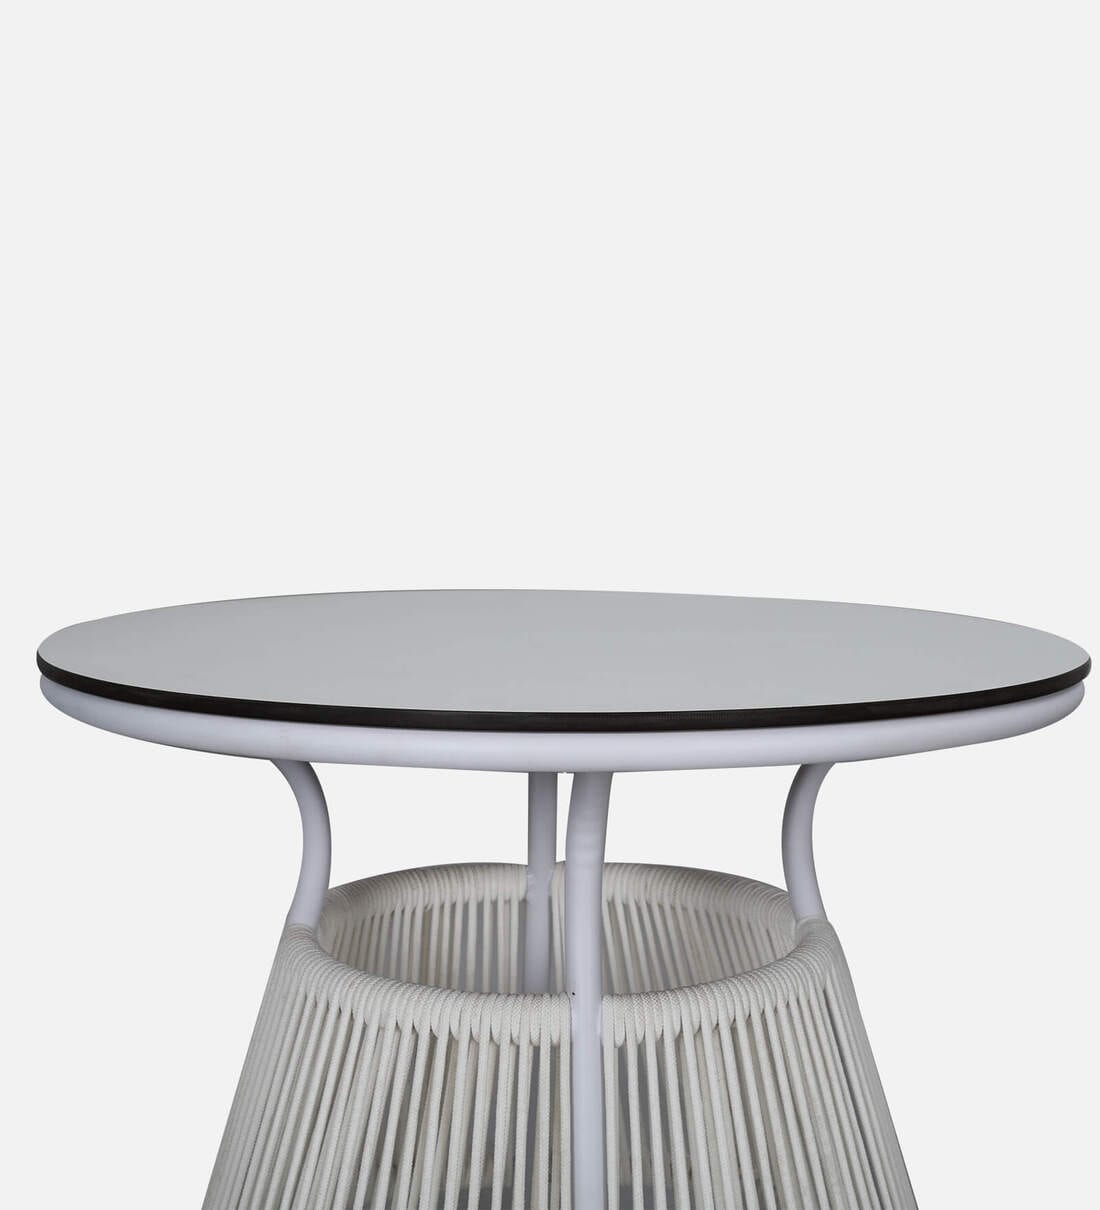 Axle Steel & Braided Rope Outdoor Table In Thbeige Finish